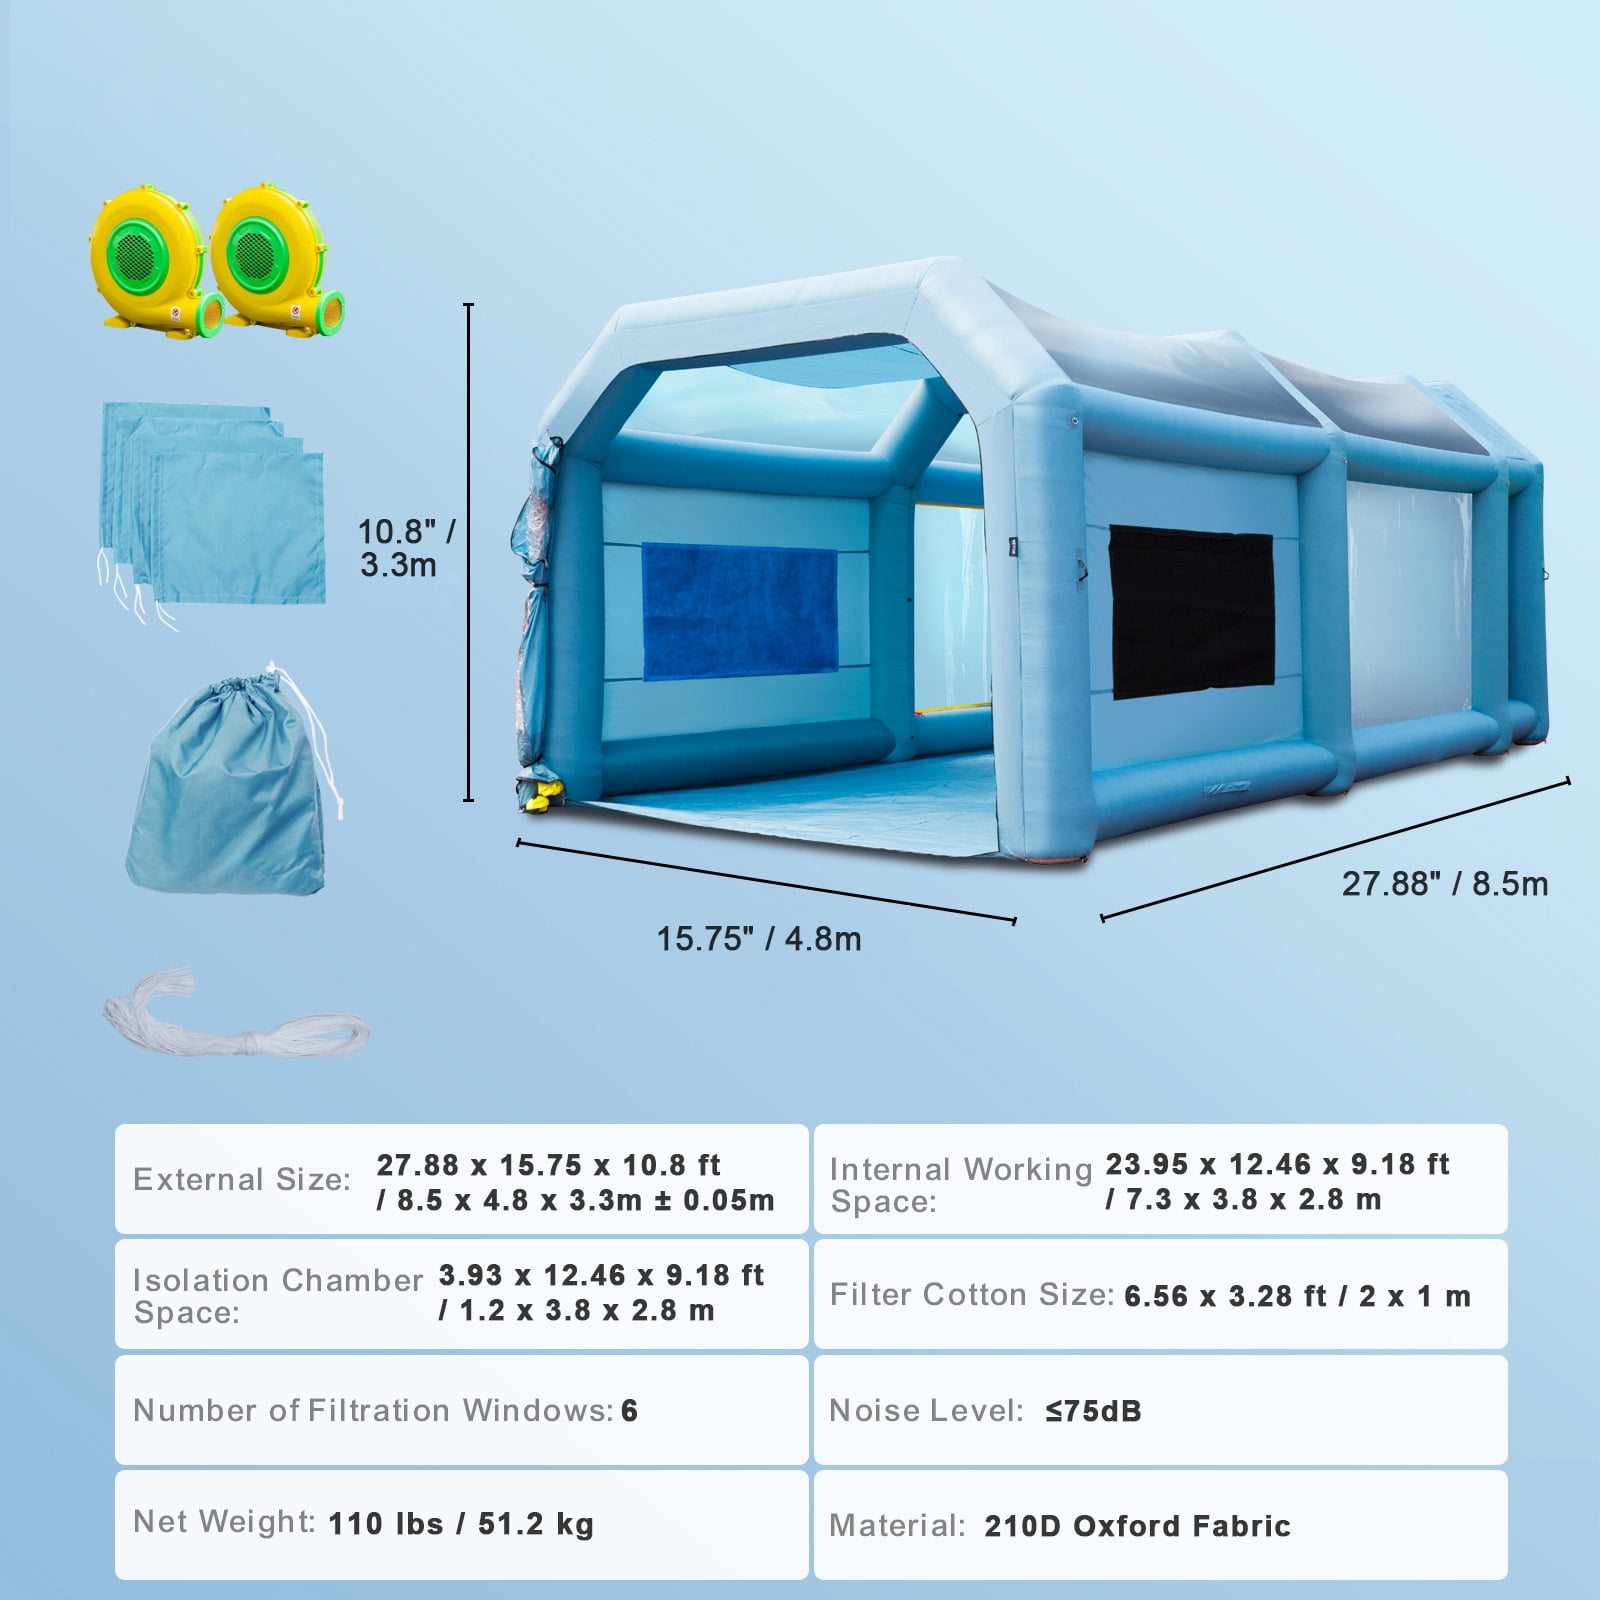 Portable Inflatable Paint Booth Large Spray Booth Car Paint Tent W/Air Filter System & Blowers Edrosie Inc Size: 118 H x 315 W x 177.2 D